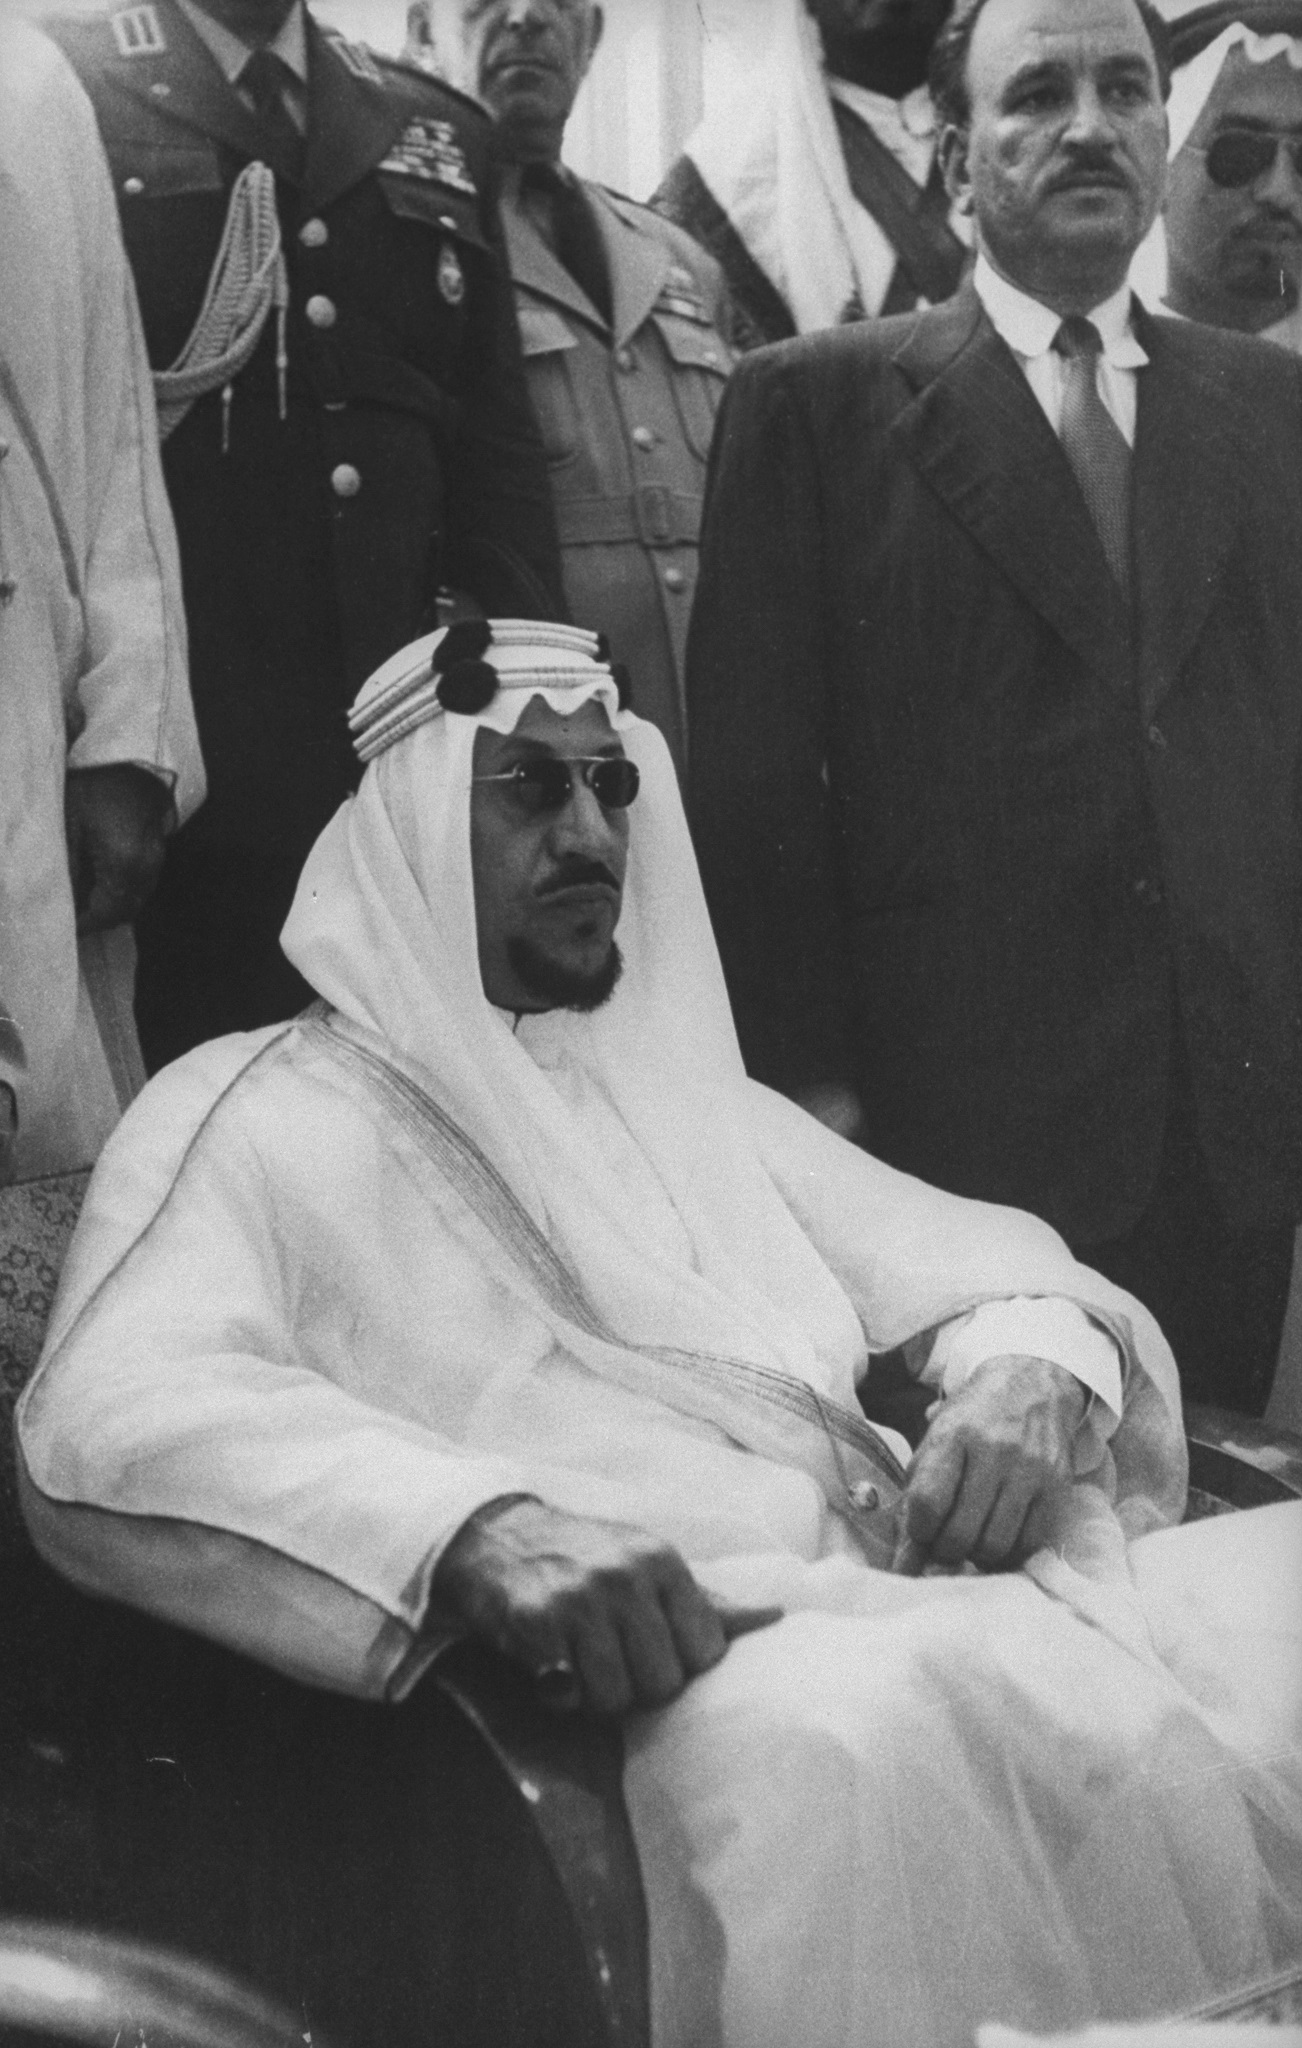 The relaxed King Saud resting in a seat during his visit to the Shah of Iran. (Photo by James WhitmoreTime Life PicturesGetty Images)